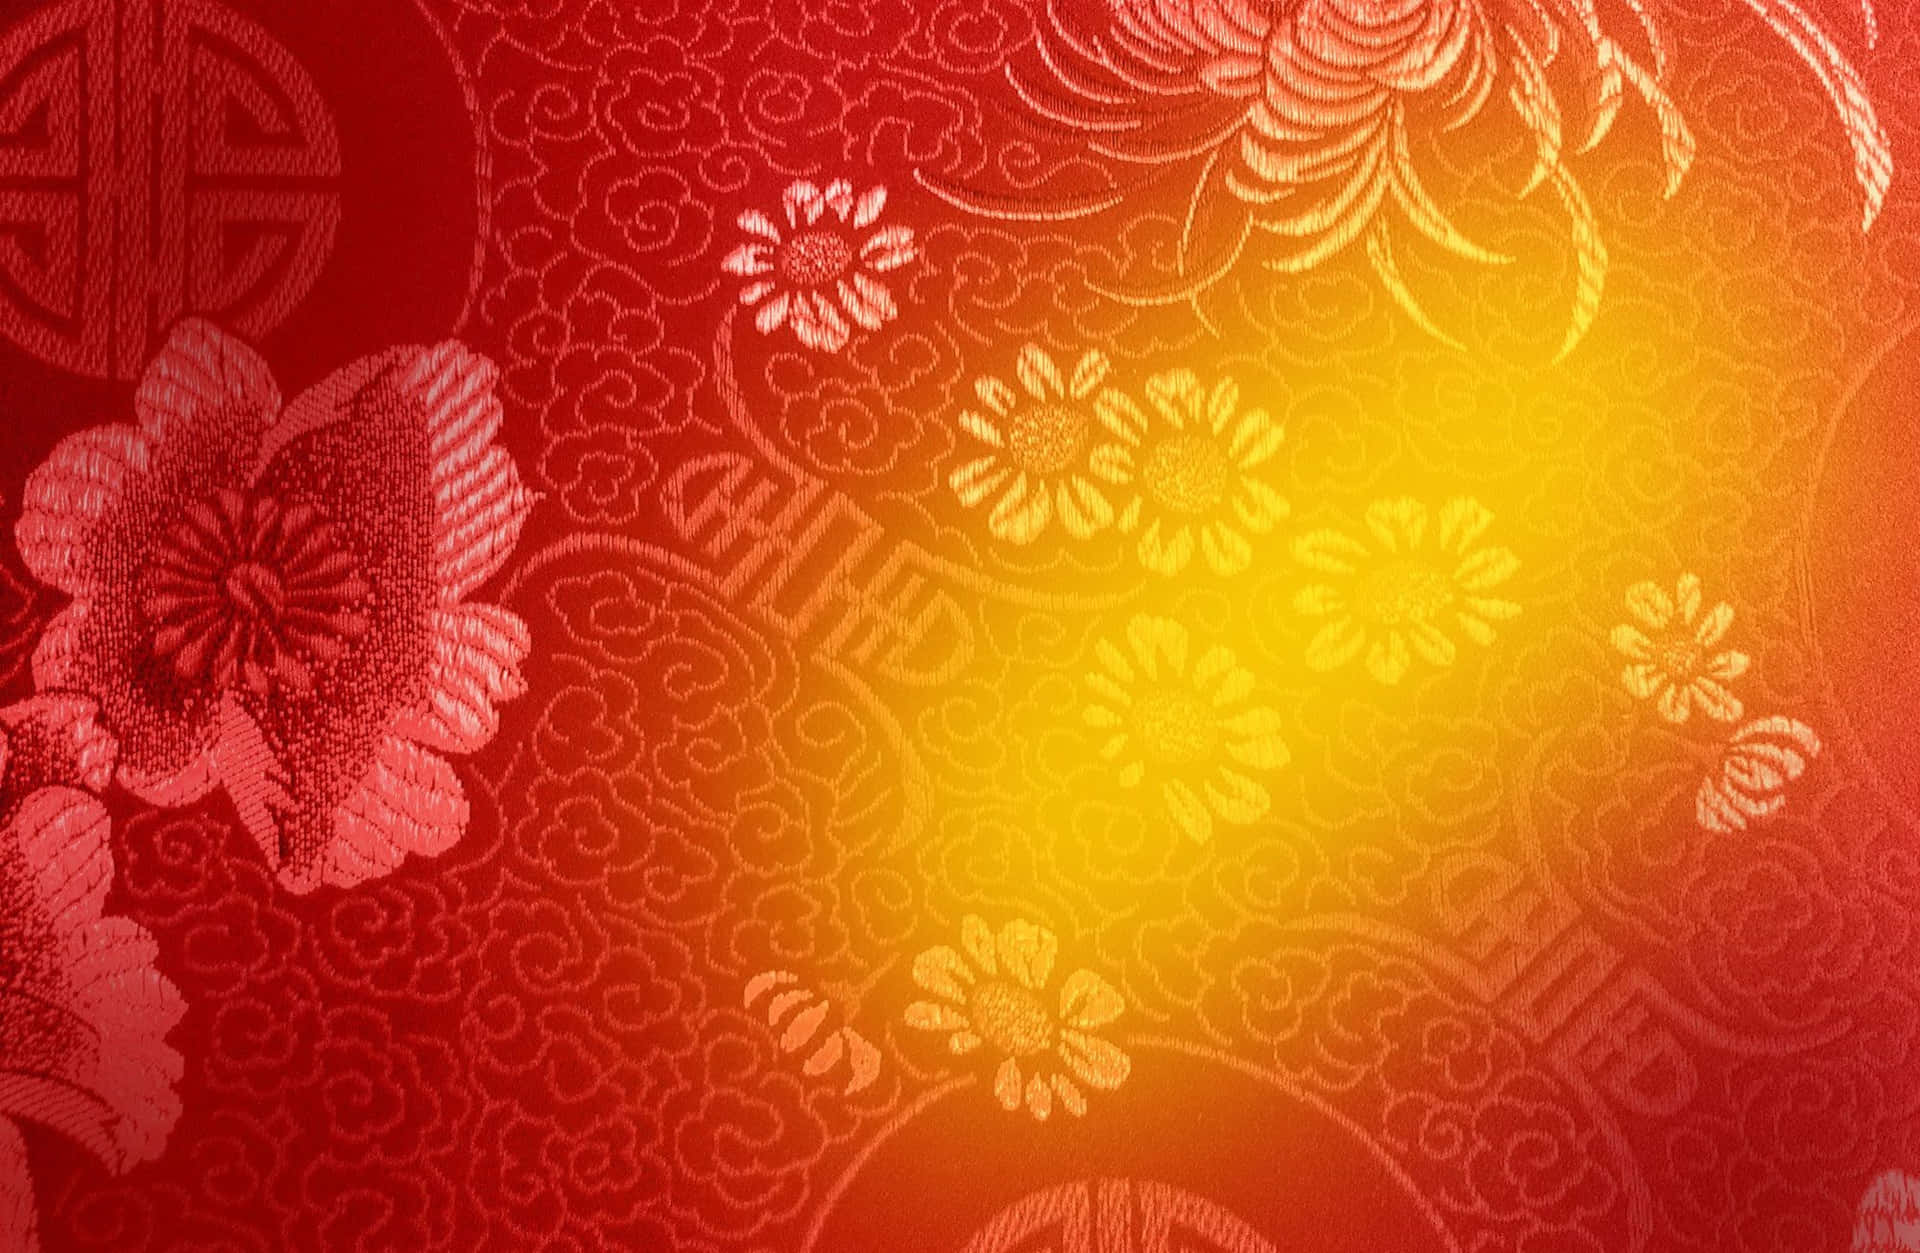 A symbol of joy and prosperity - a festive golden Chinese New Year background.